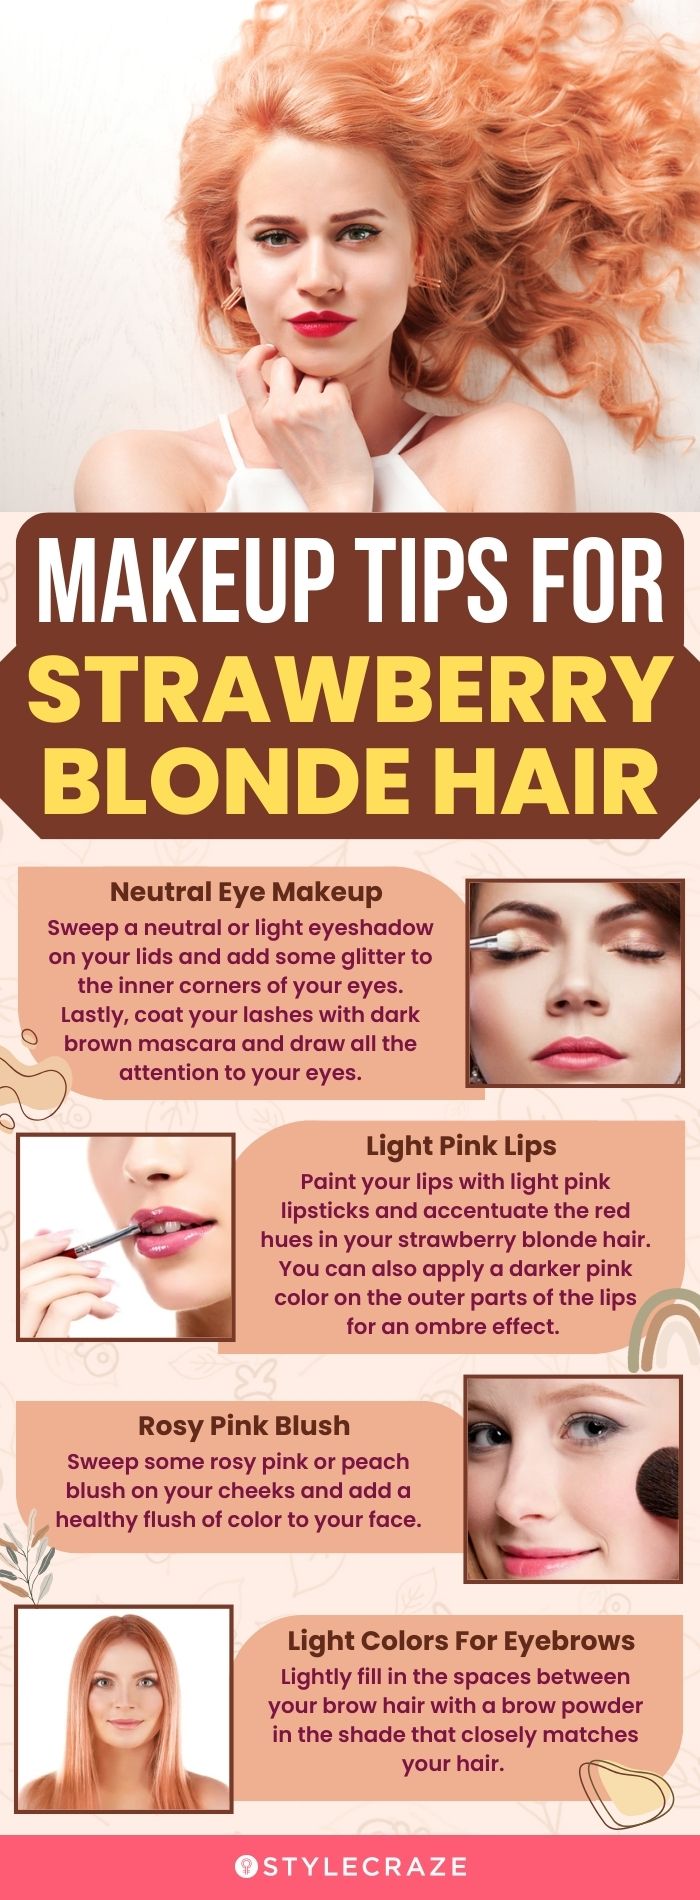 Makeup Tips For Strawberry Blonde Hair (infographic)